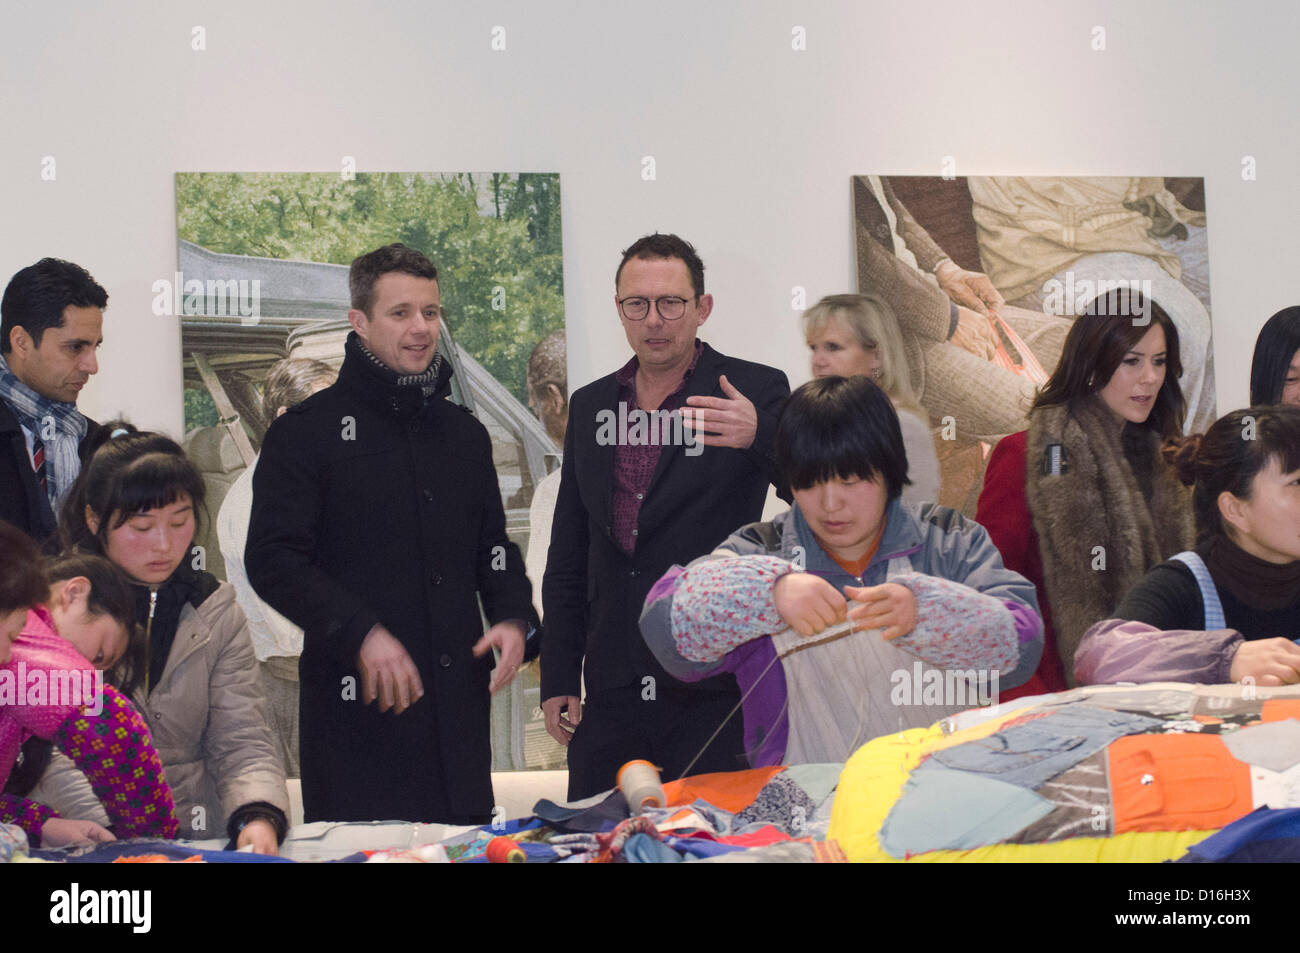 Crown Prince Frederik and Crown Princess Mary of Denmark visit Red Brick Art Gallery in the 798 Art District of Beijing, China as part of an Asia tour including Hong Kong and Beijing. © Time-Snaps Stock Photo